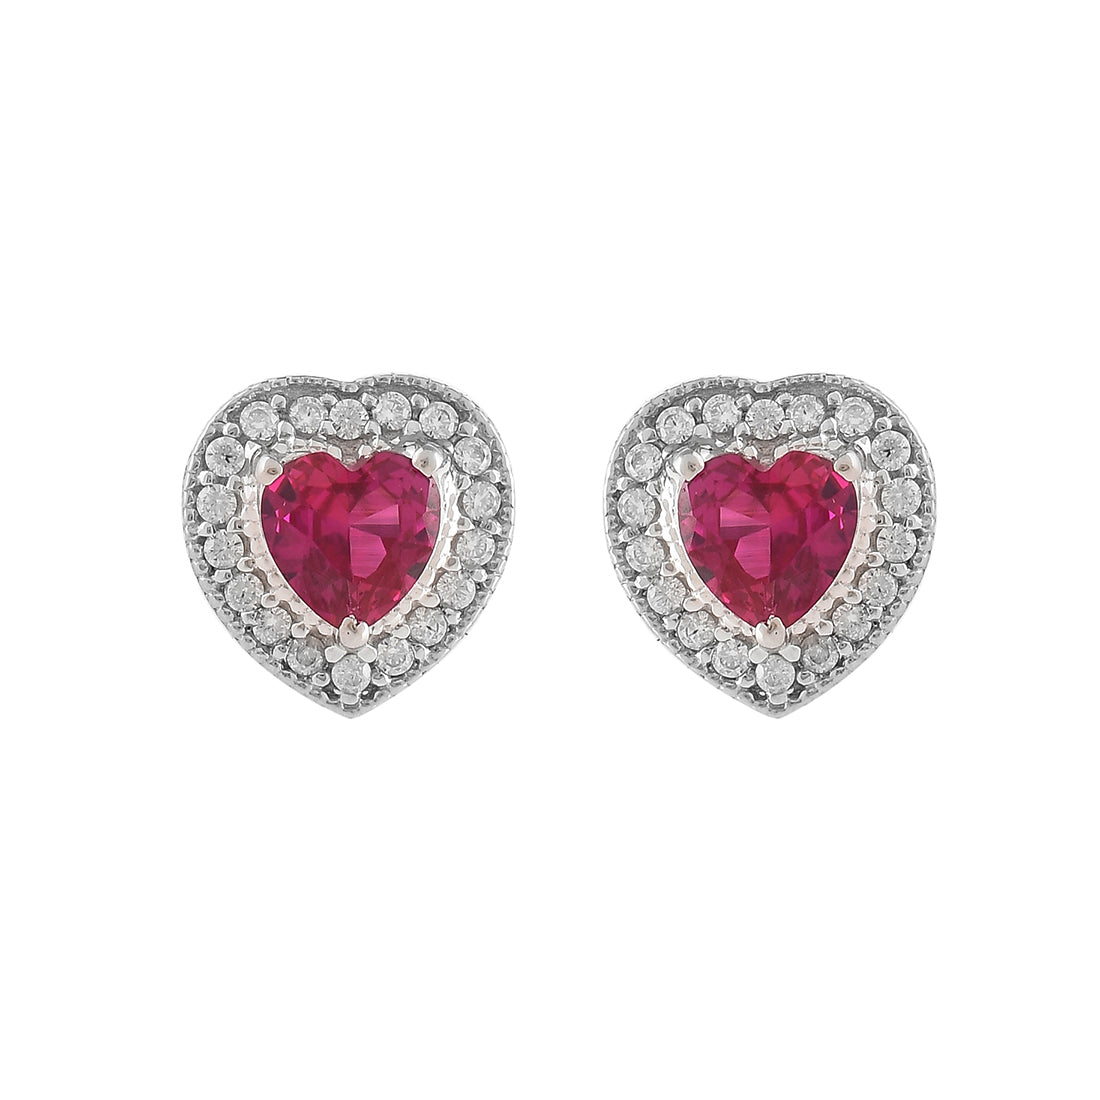 Women's Heart Red And Silver Cz Stud Earrings - Voylla